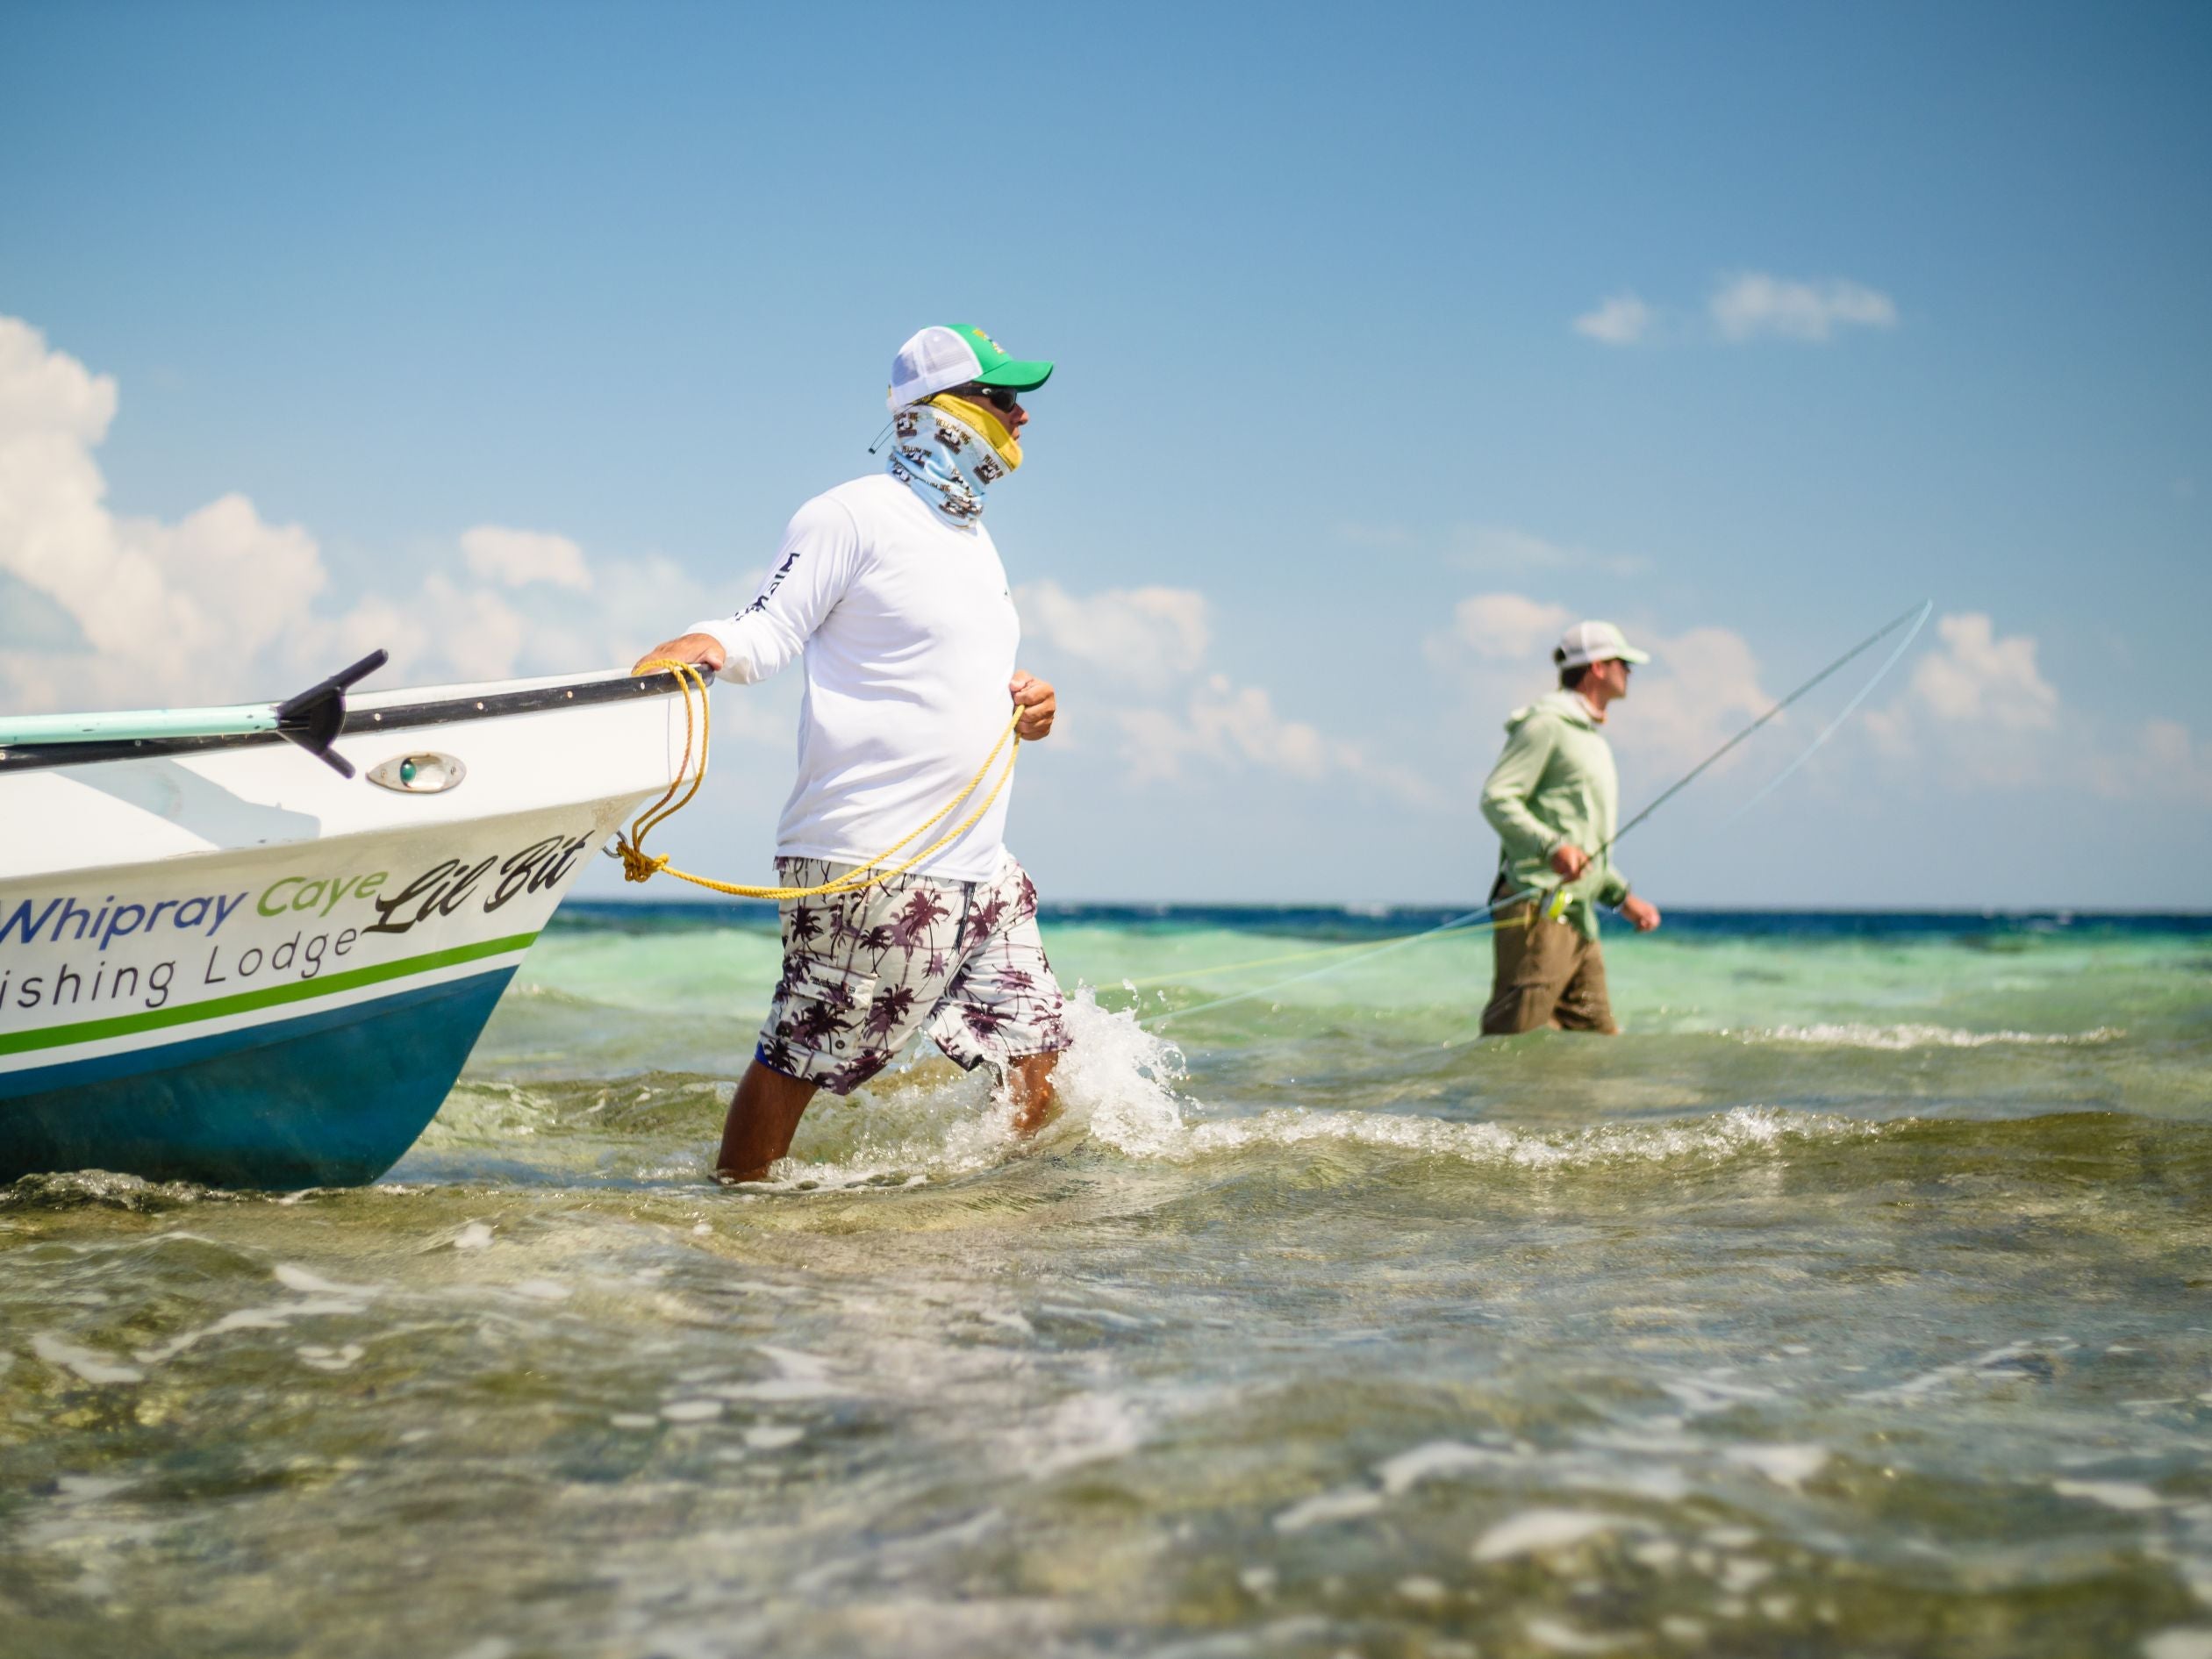 Fly fishing rod and jack fish on beach in Belize Central America